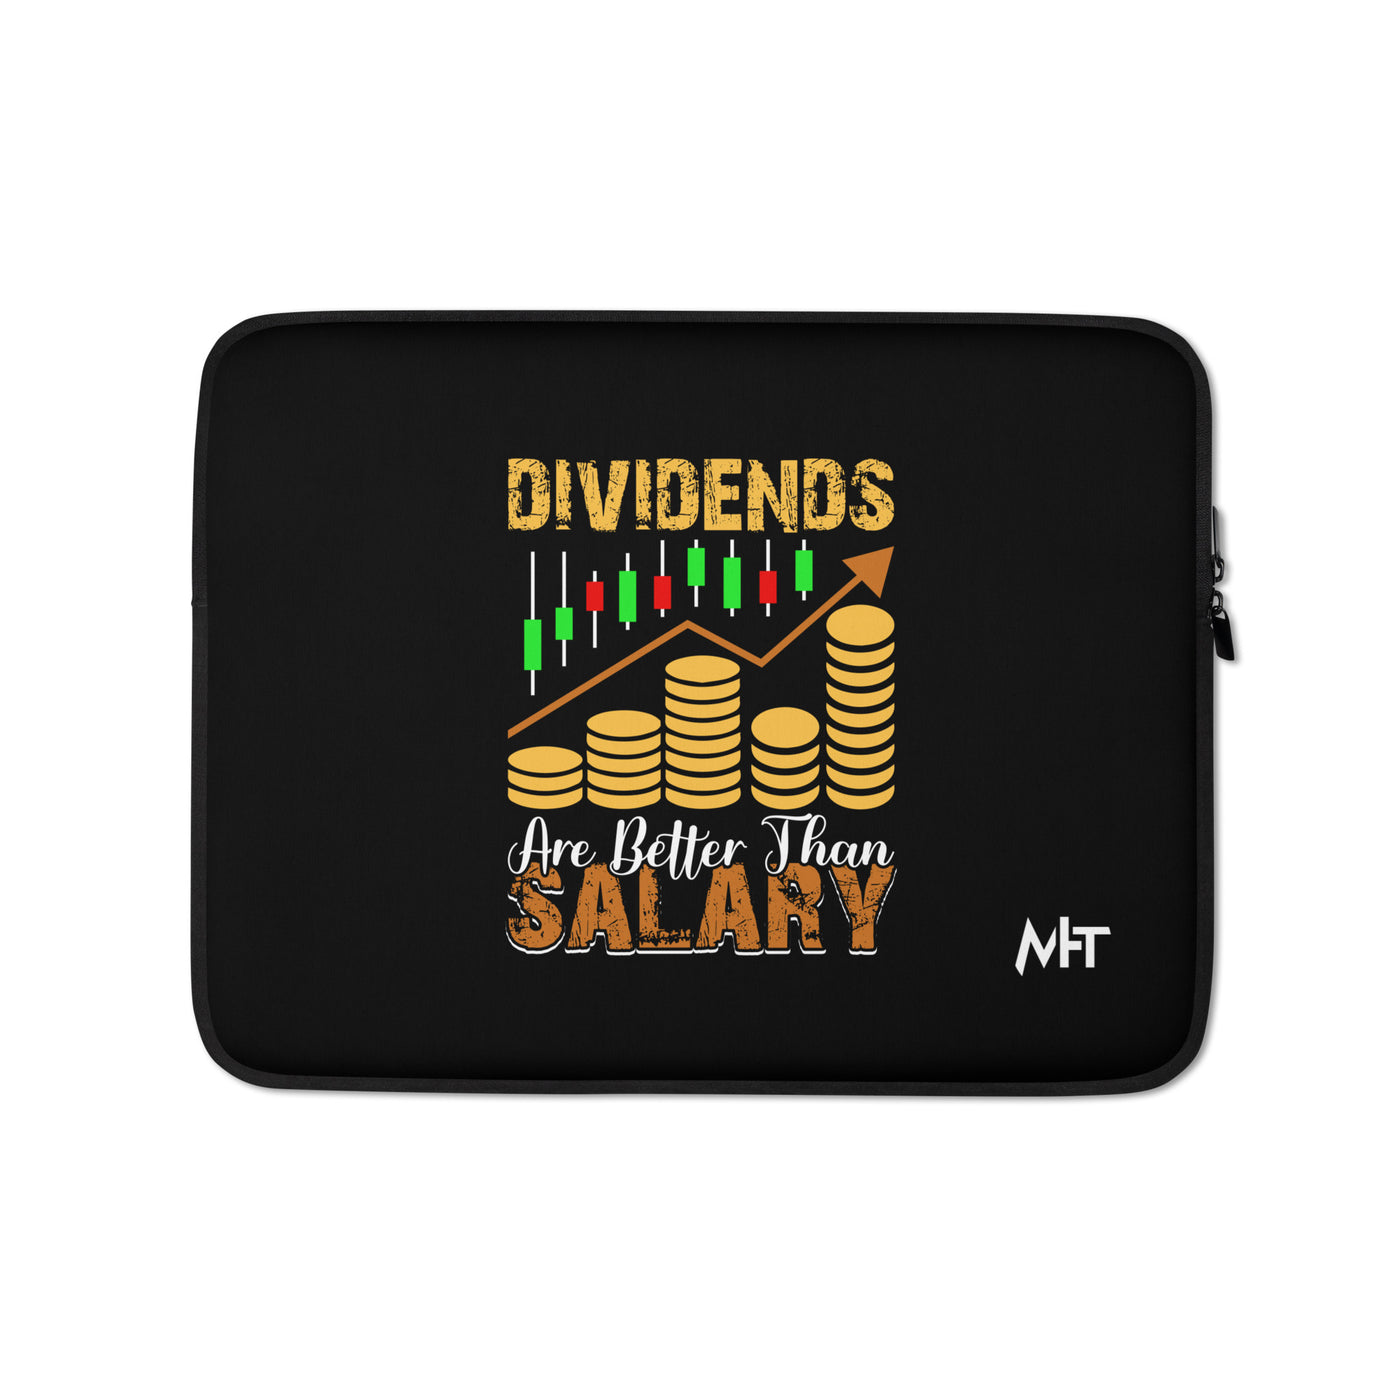 Dividends are Better than Salary - Laptop Sleeve